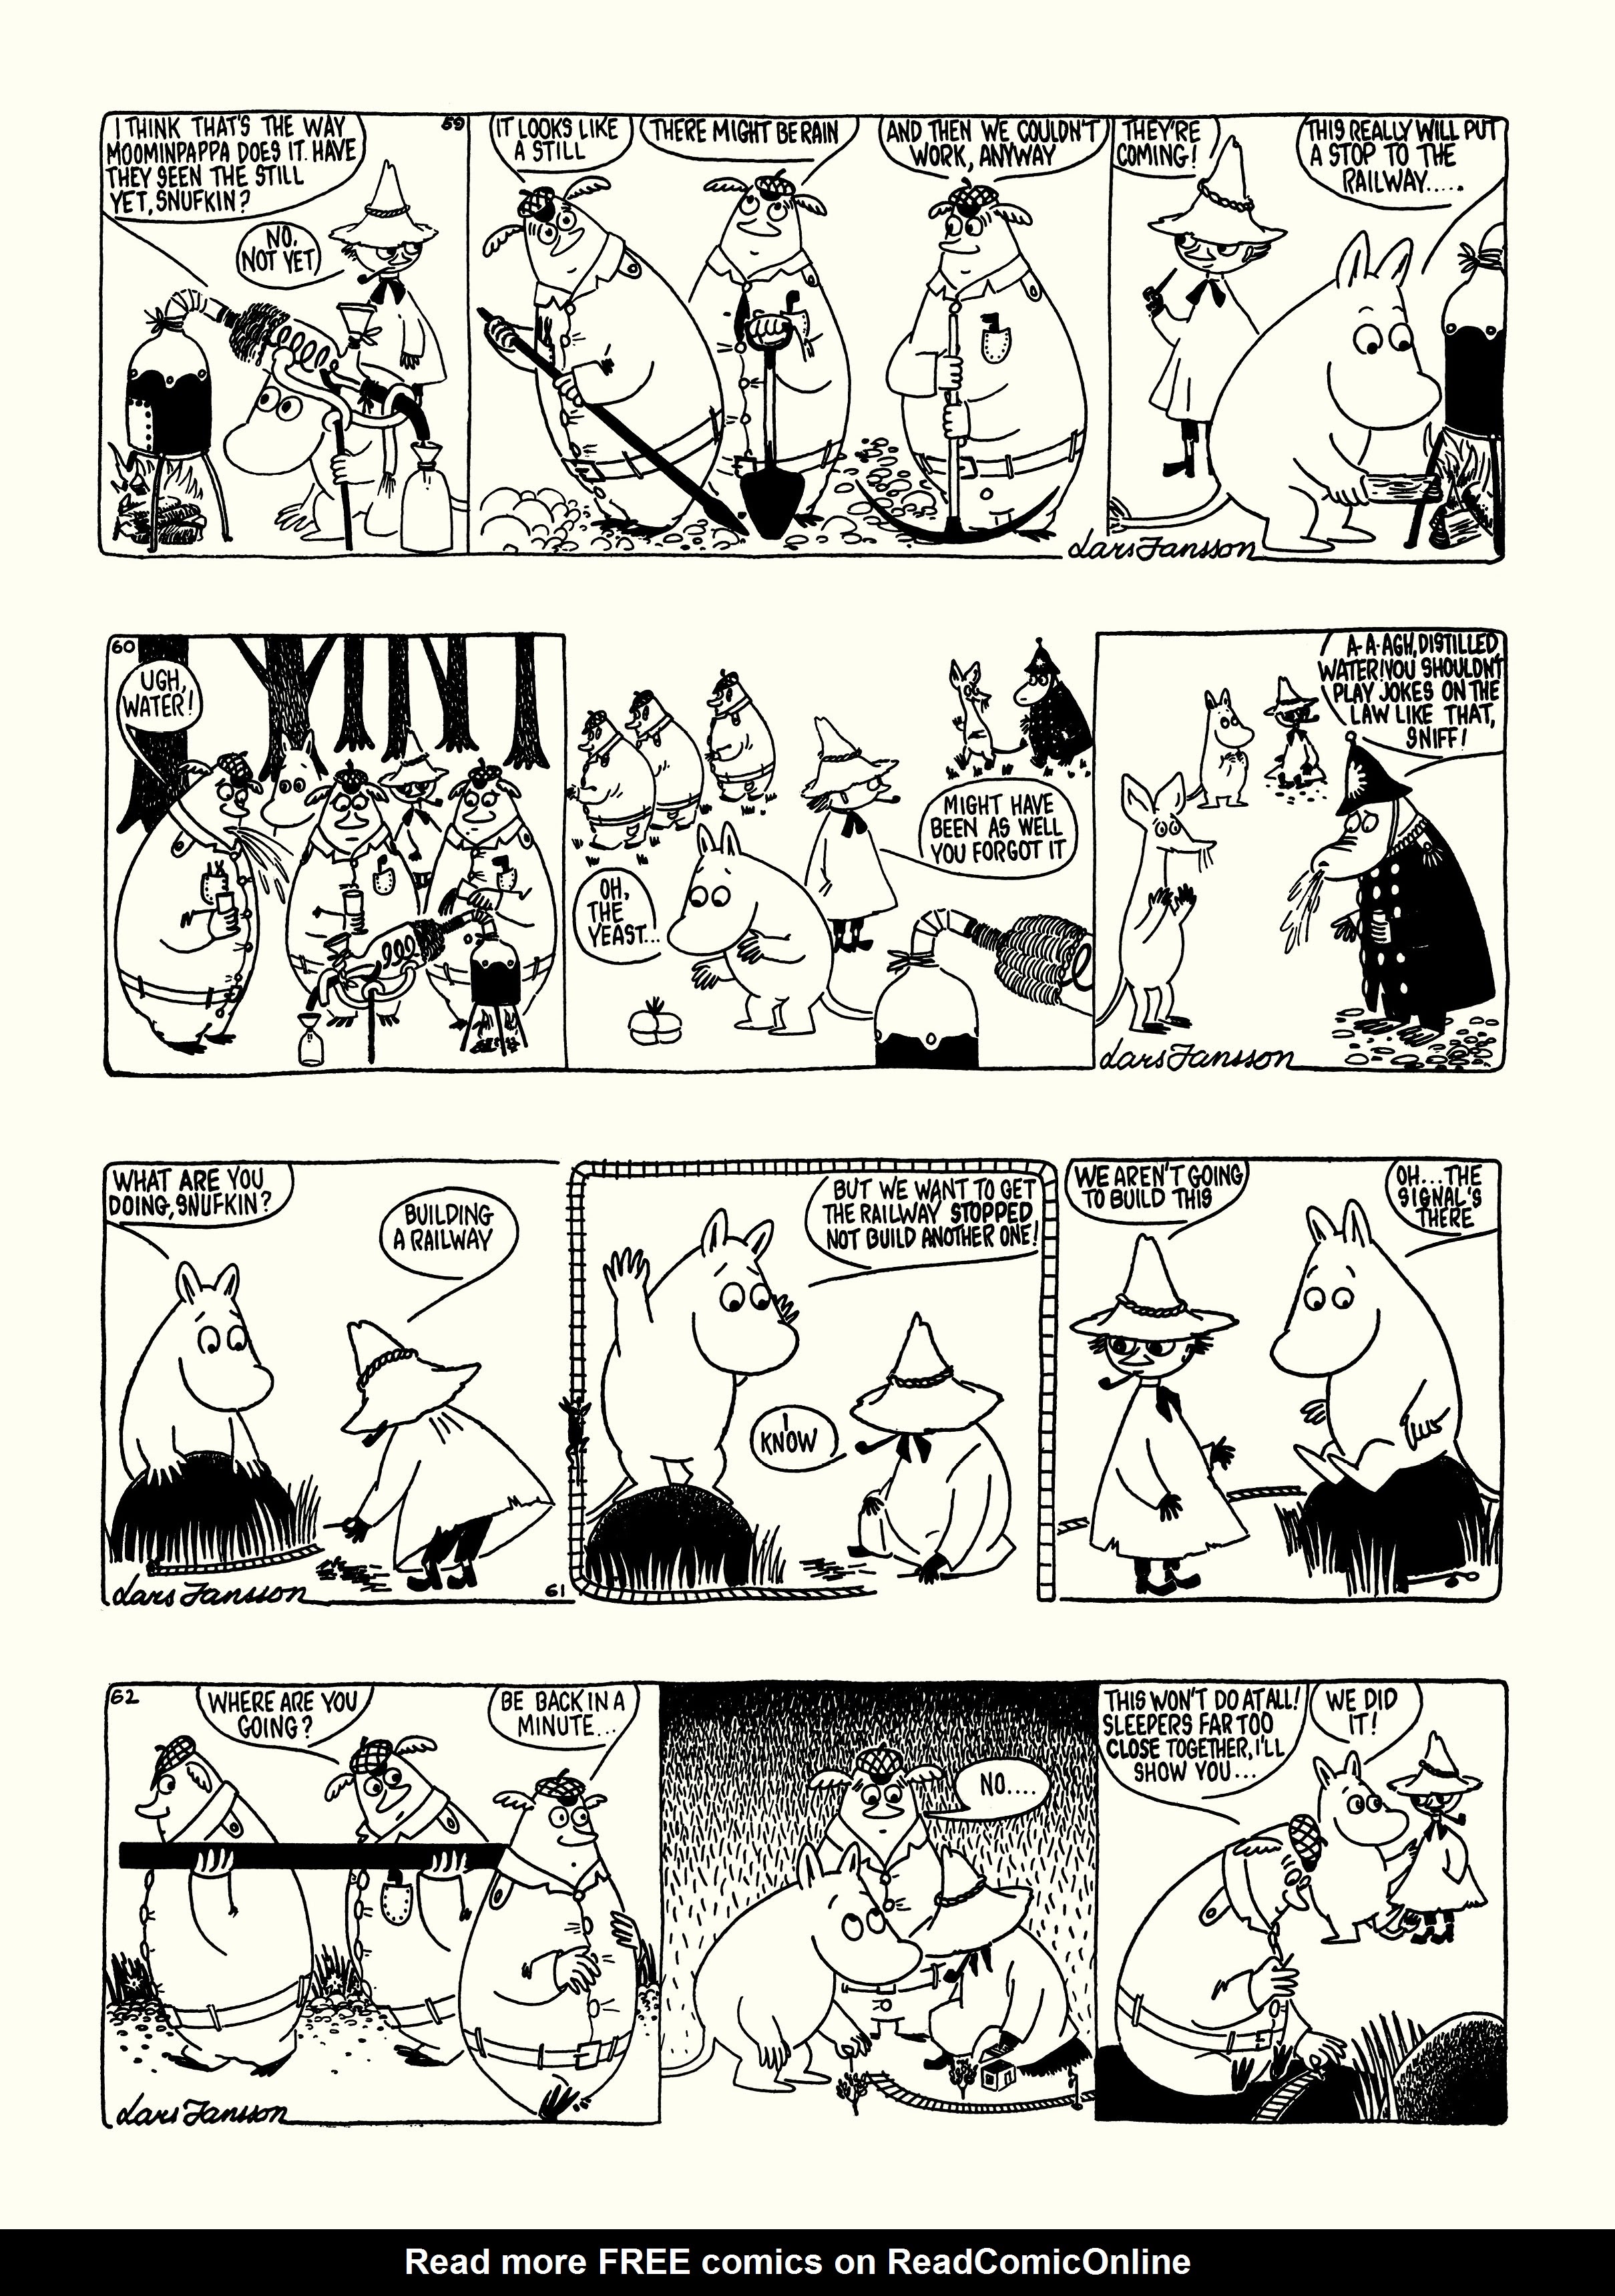 Read online Moomin: The Complete Lars Jansson Comic Strip comic -  Issue # TPB 6 - 41